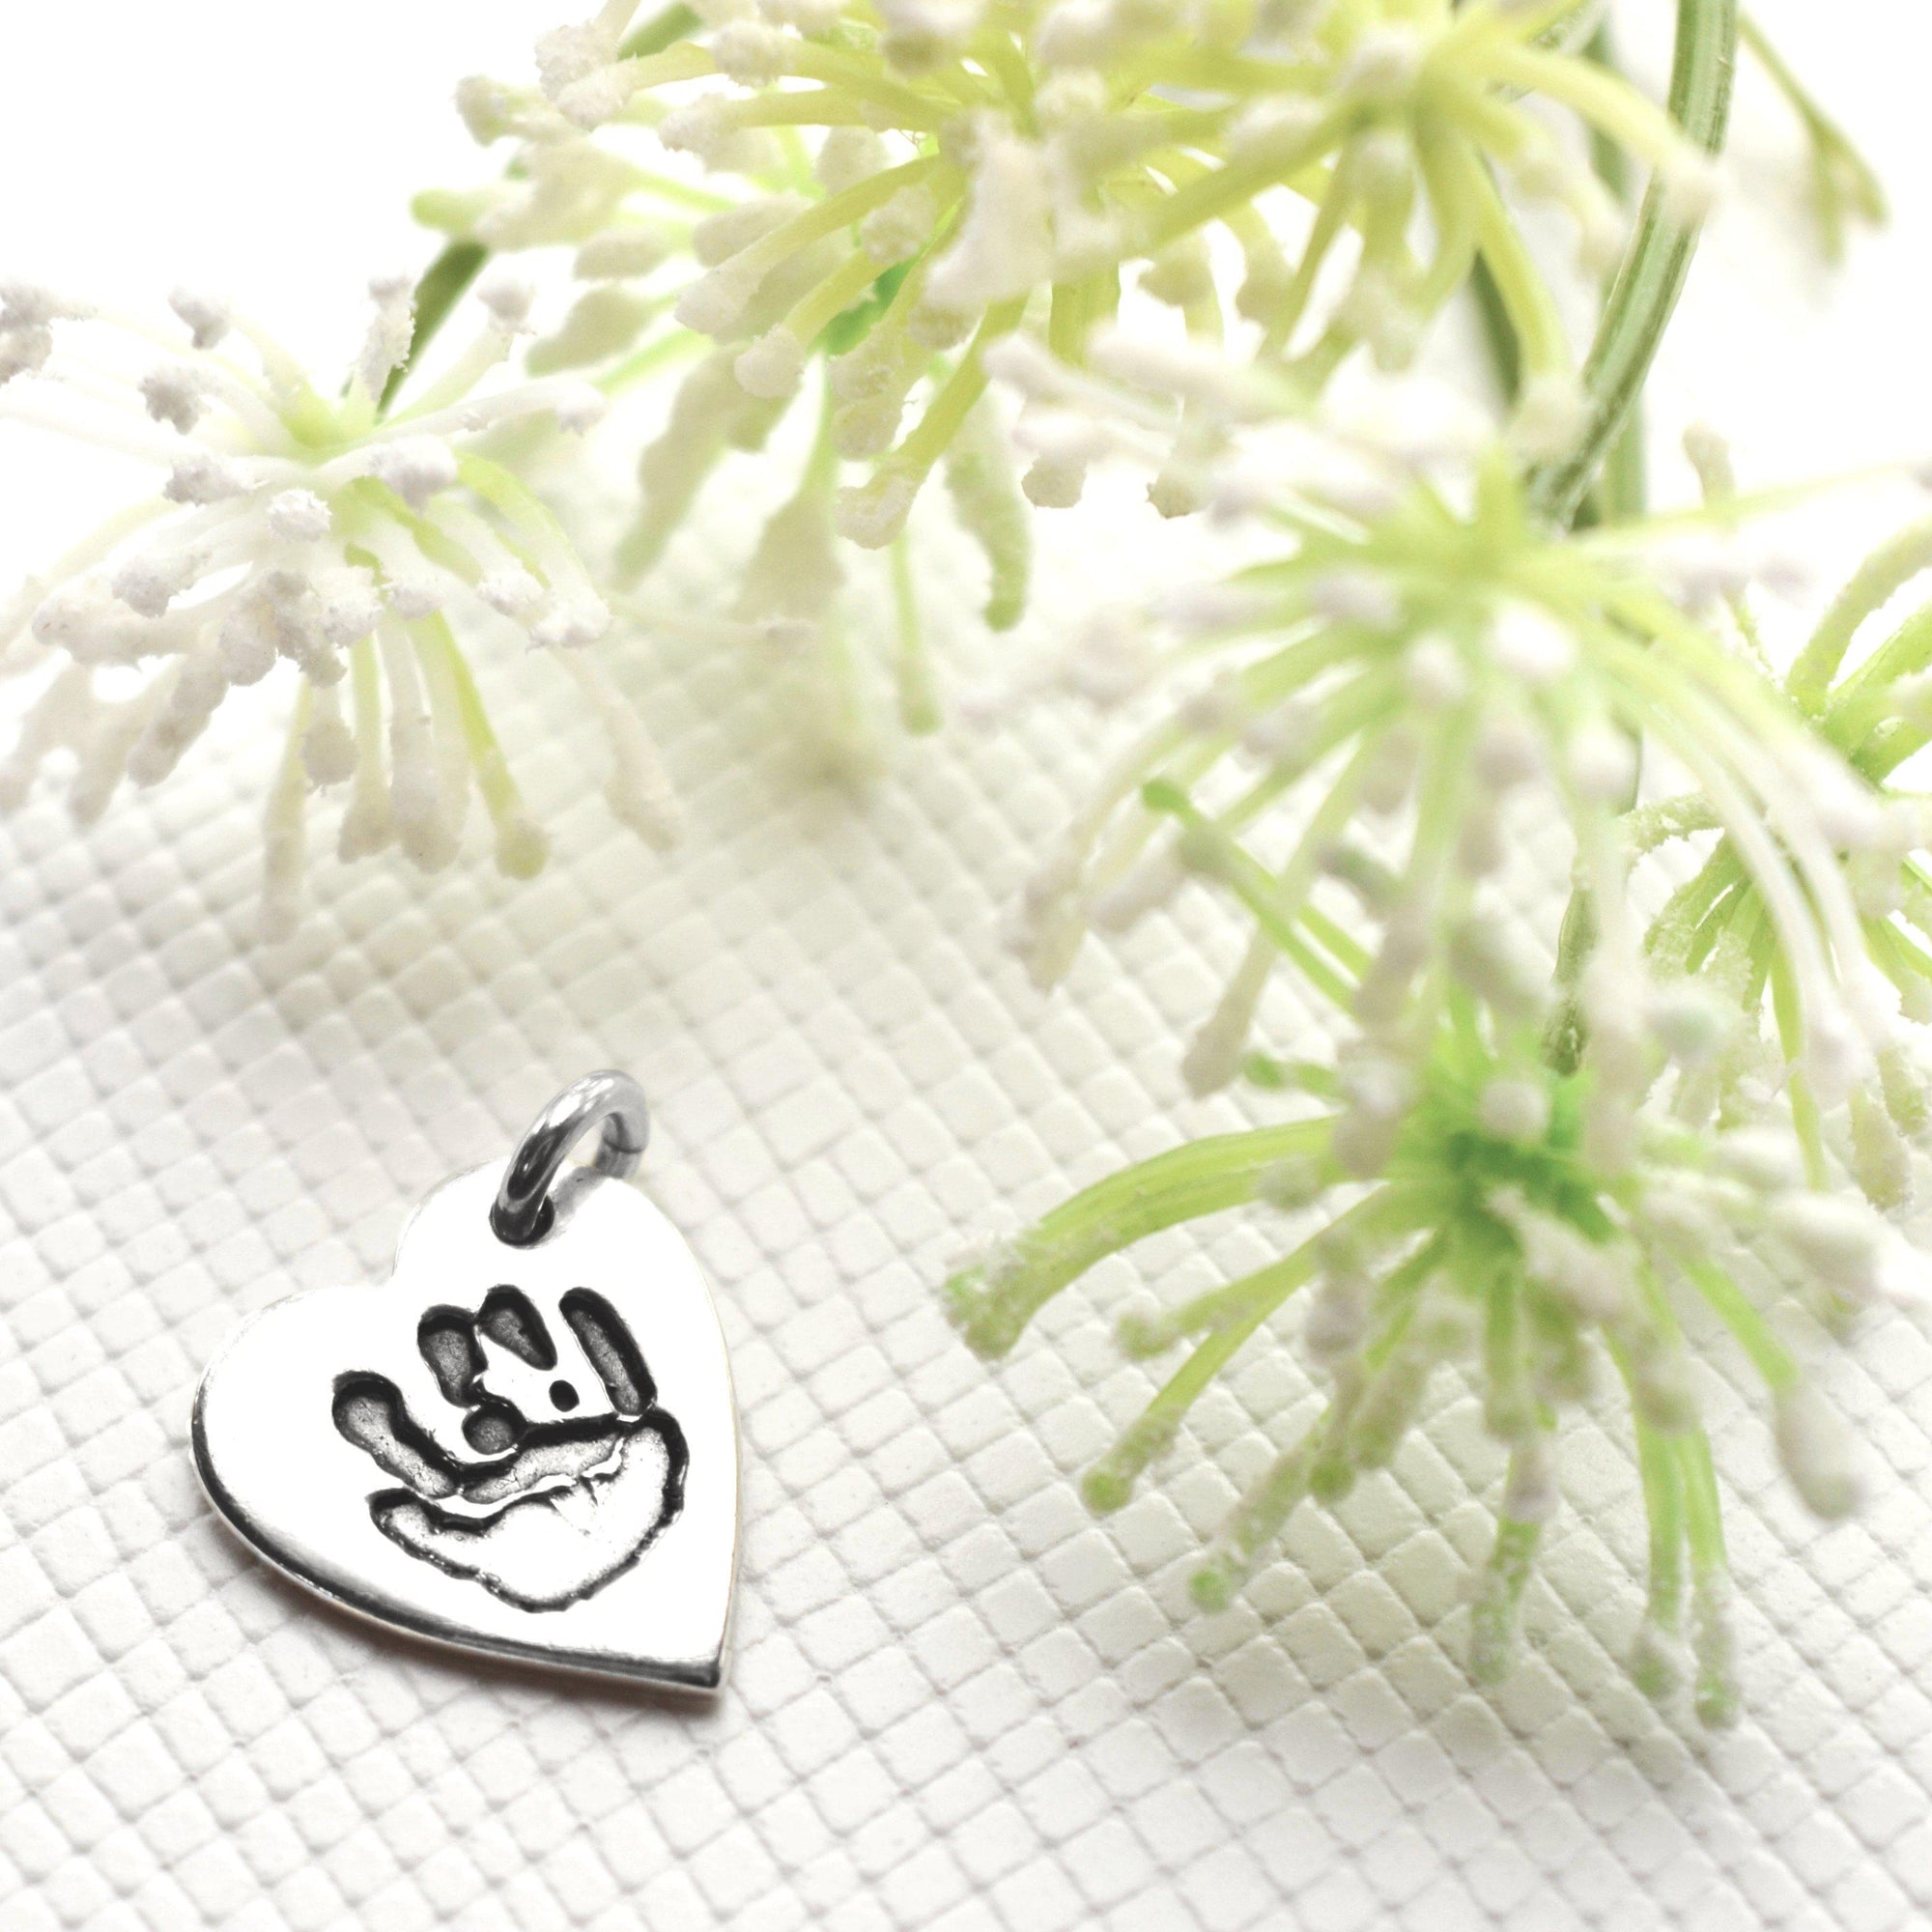 Personalized Memorial Jewelry - Hand & Footprints